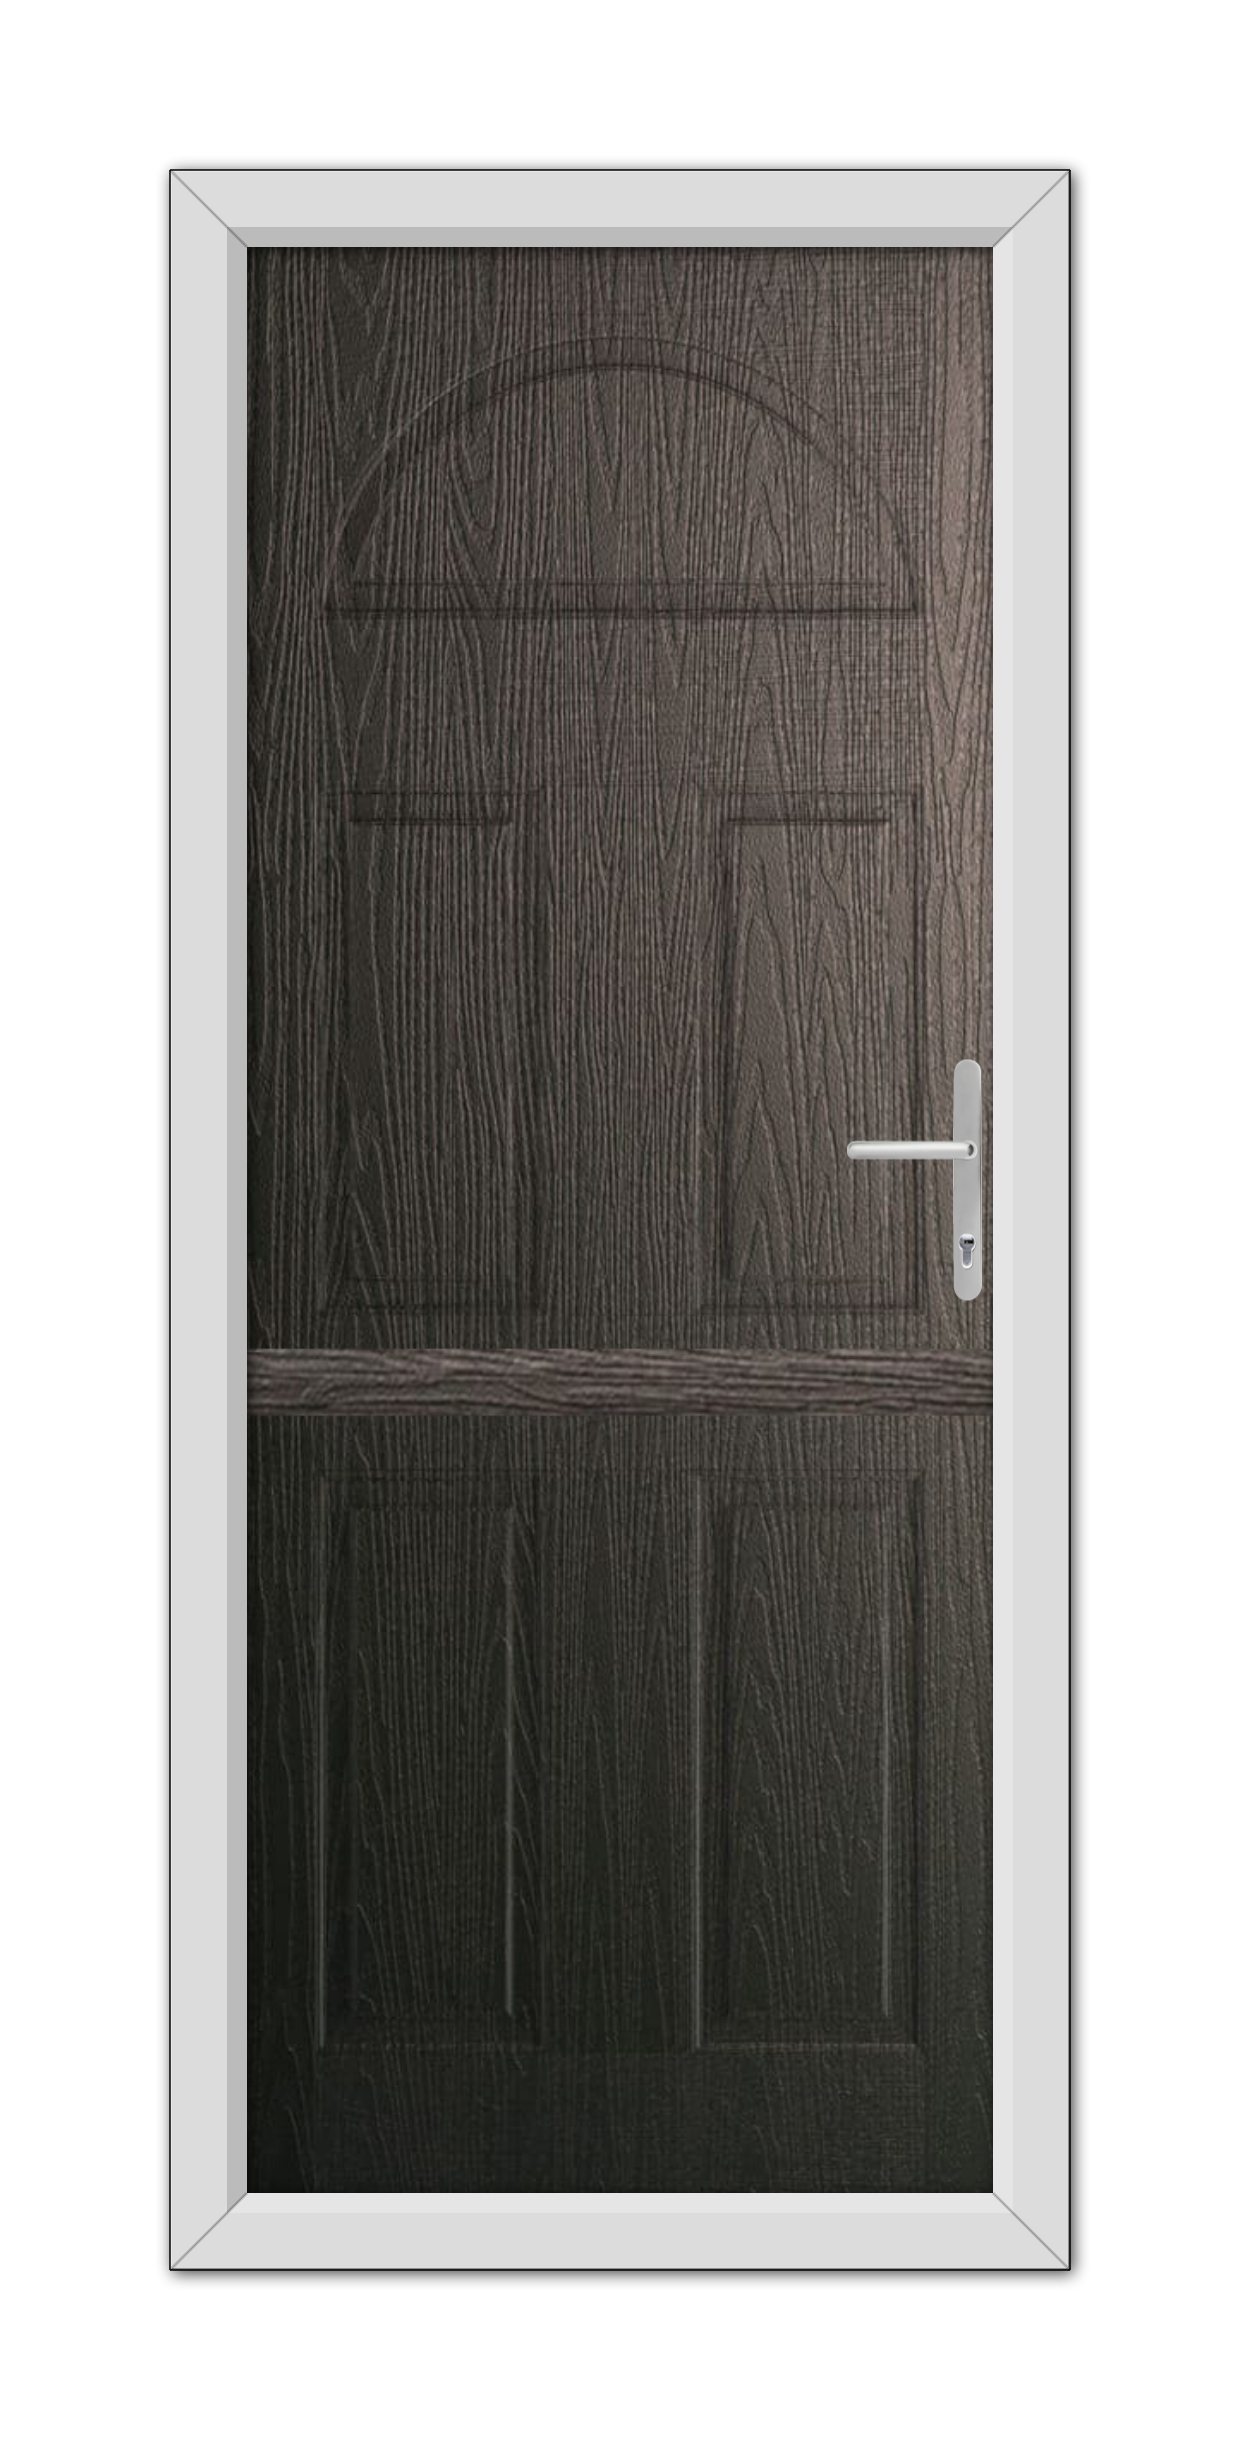 A Schwarzbraun Winslow Solid Stable Composite Door with a horizontal mail slot and a modern handle, installed within a white frame.